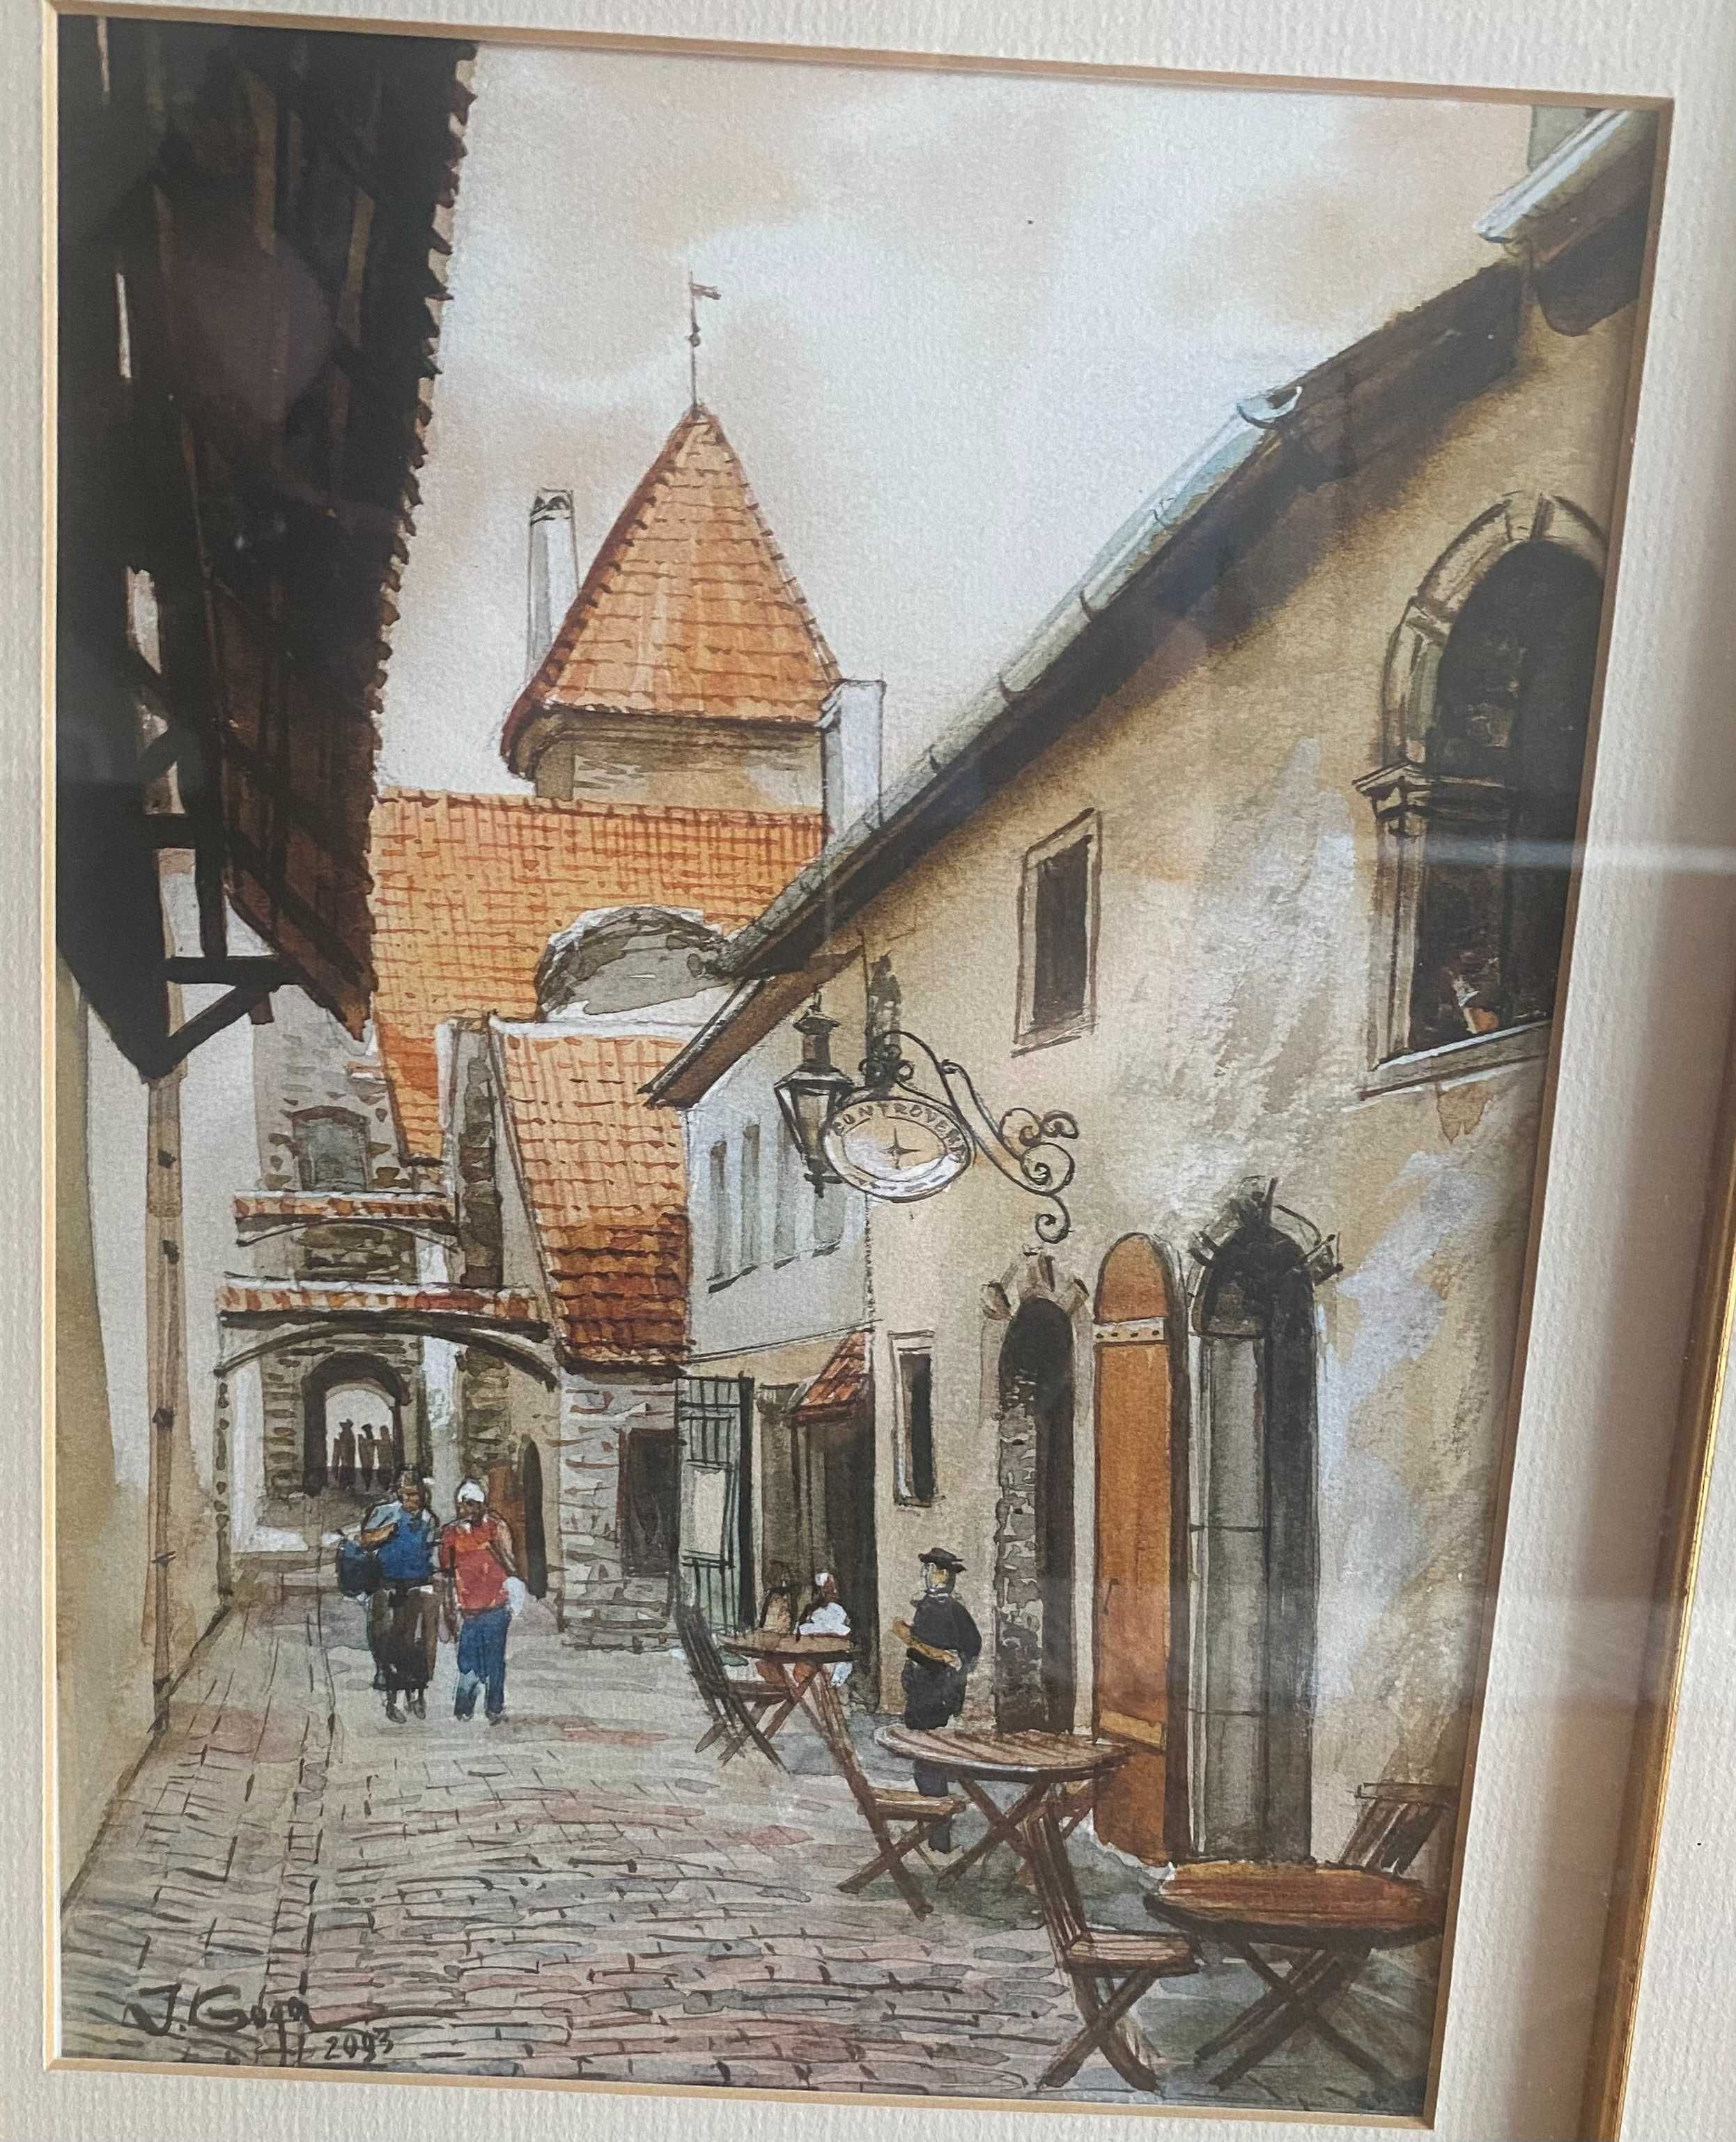 Two paintings of Estonian street life (Price reduced to sell!)